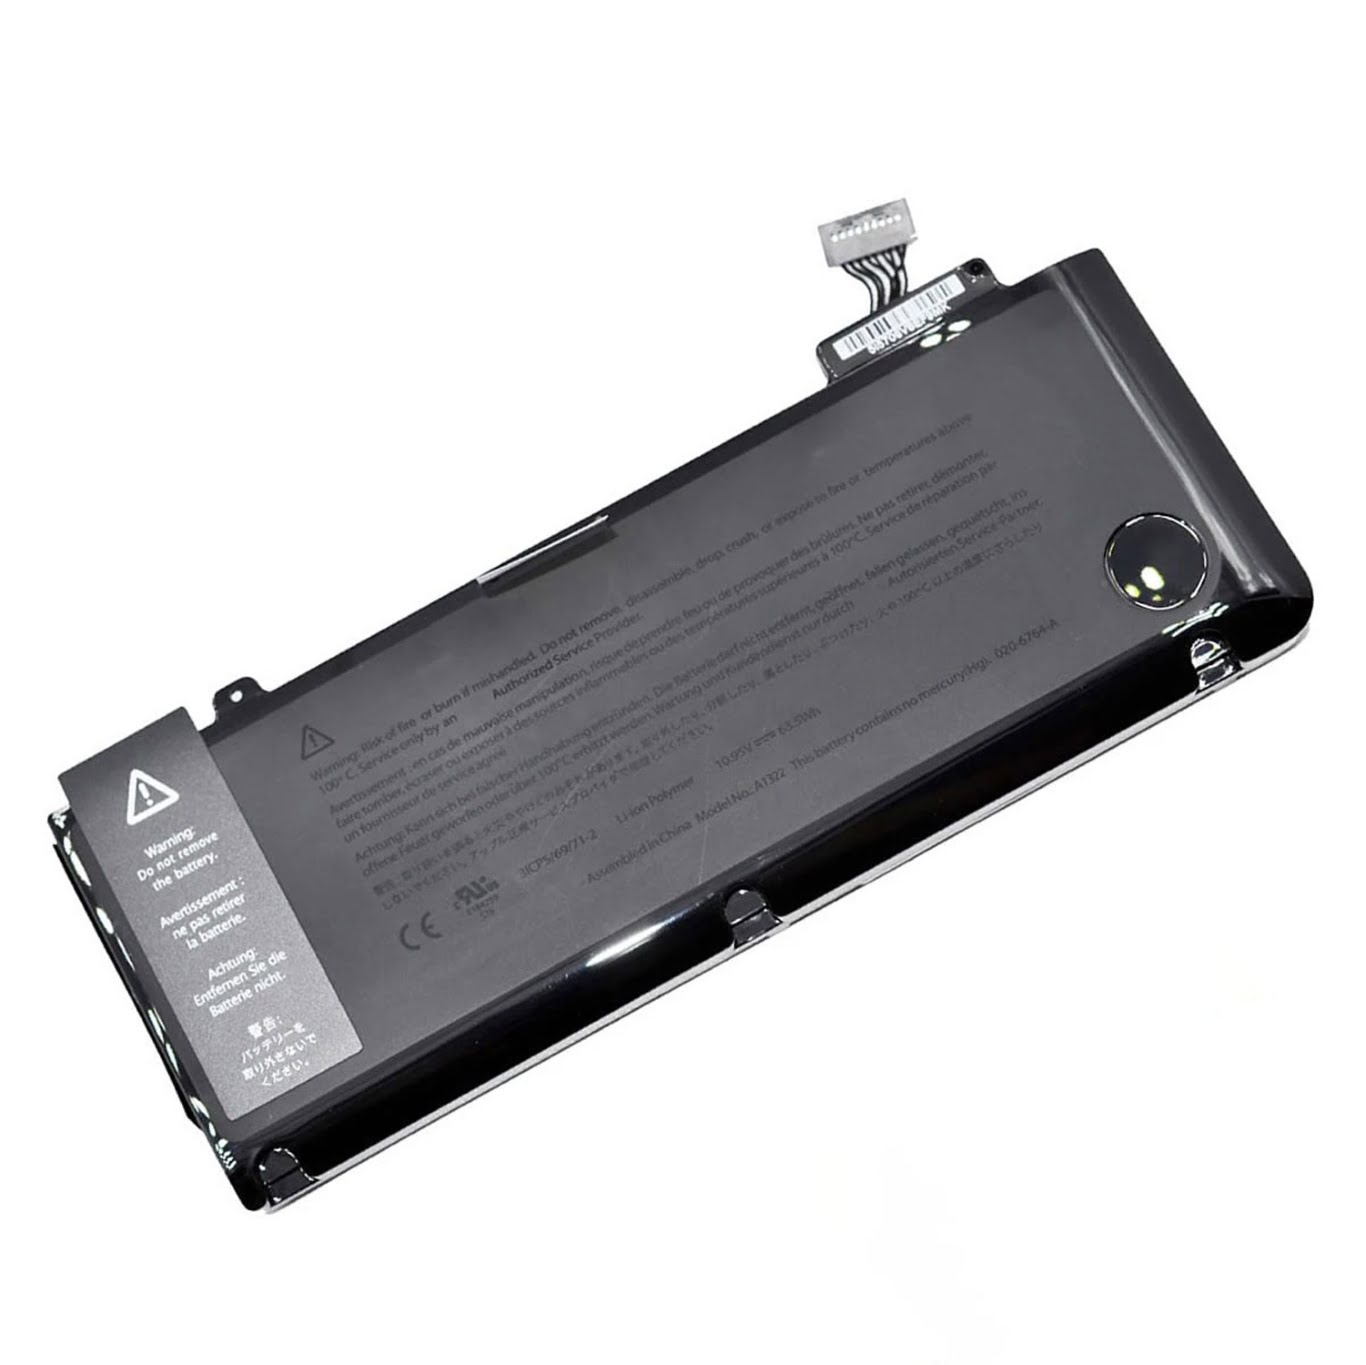 020-6547-A, 020-6765-A replacement Laptop Battery for Apple MacBook Pro 13  MB990*/A, MacBook Pro 13  MB990CH/A, 10.95v, 63.5wh